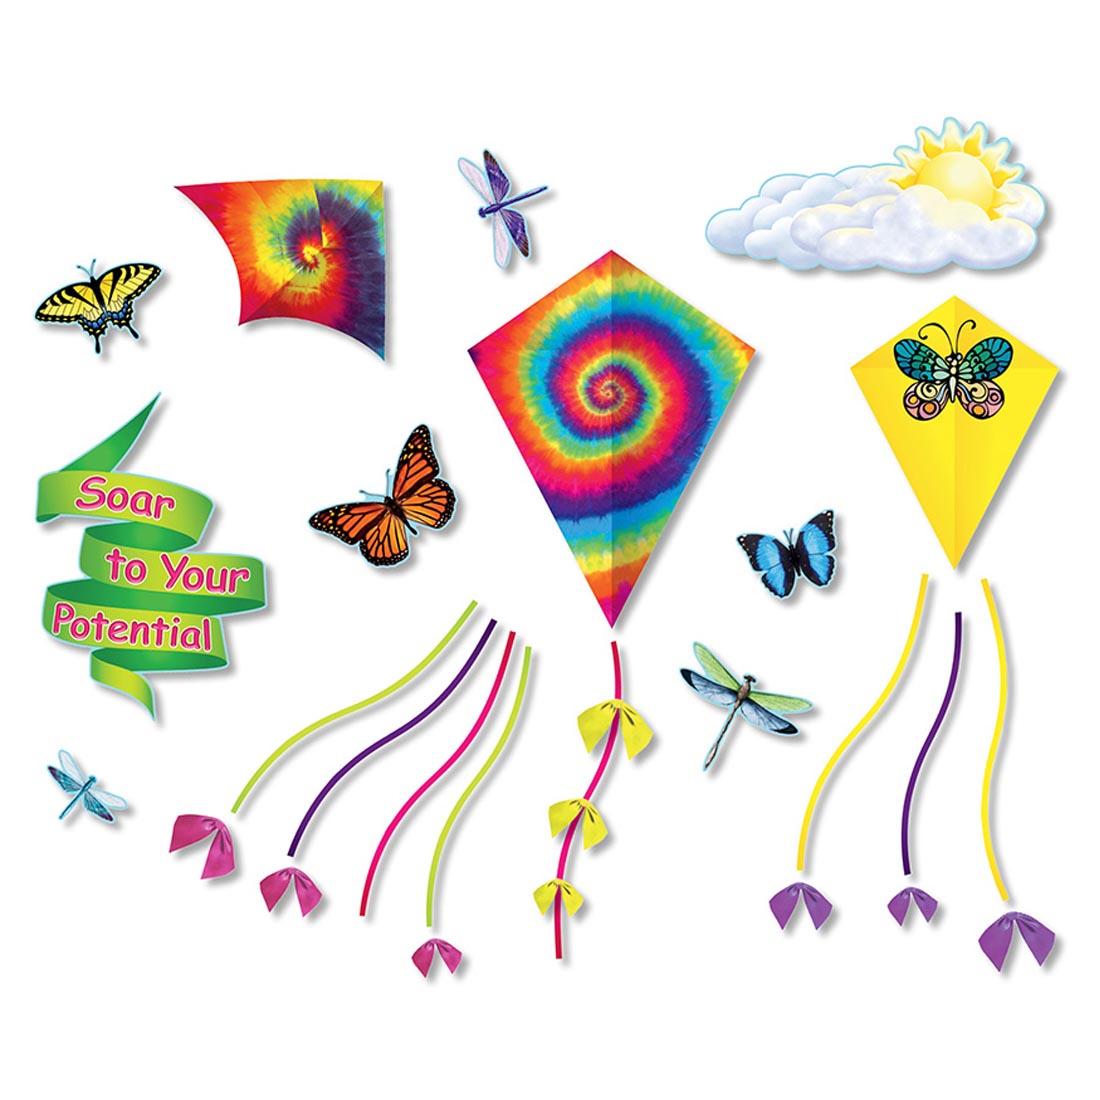 bulletin board set with colorful kits, butterflies and dragonflies